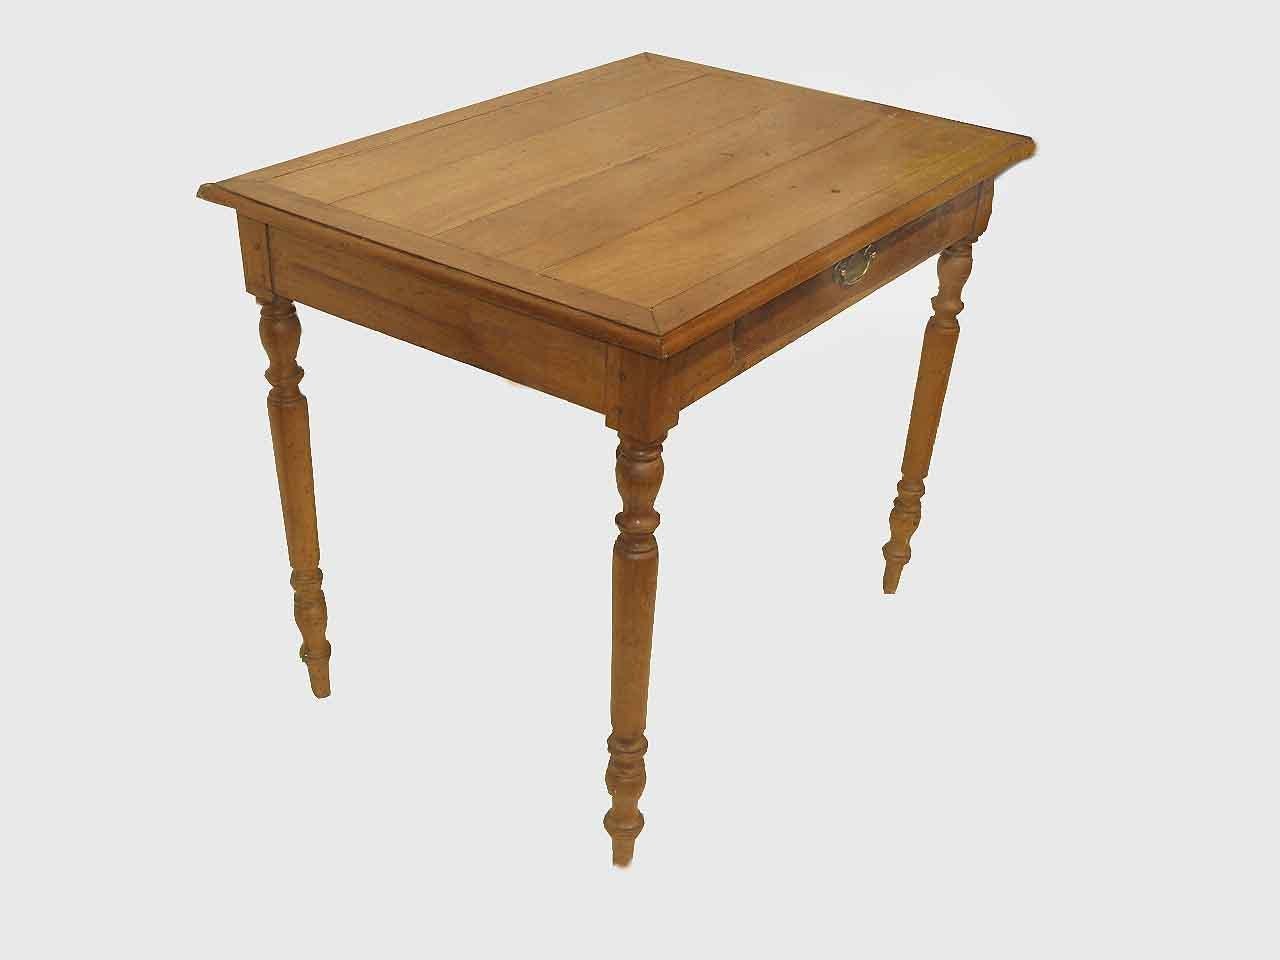 French cherry one drawer side table, the multi board top with beautiful grain and patina is ''bread boarded'' around the entire perimeter and has a molded edge. The drawer has a single brass pull; slender legs with crisp turnings. Double exposed peg